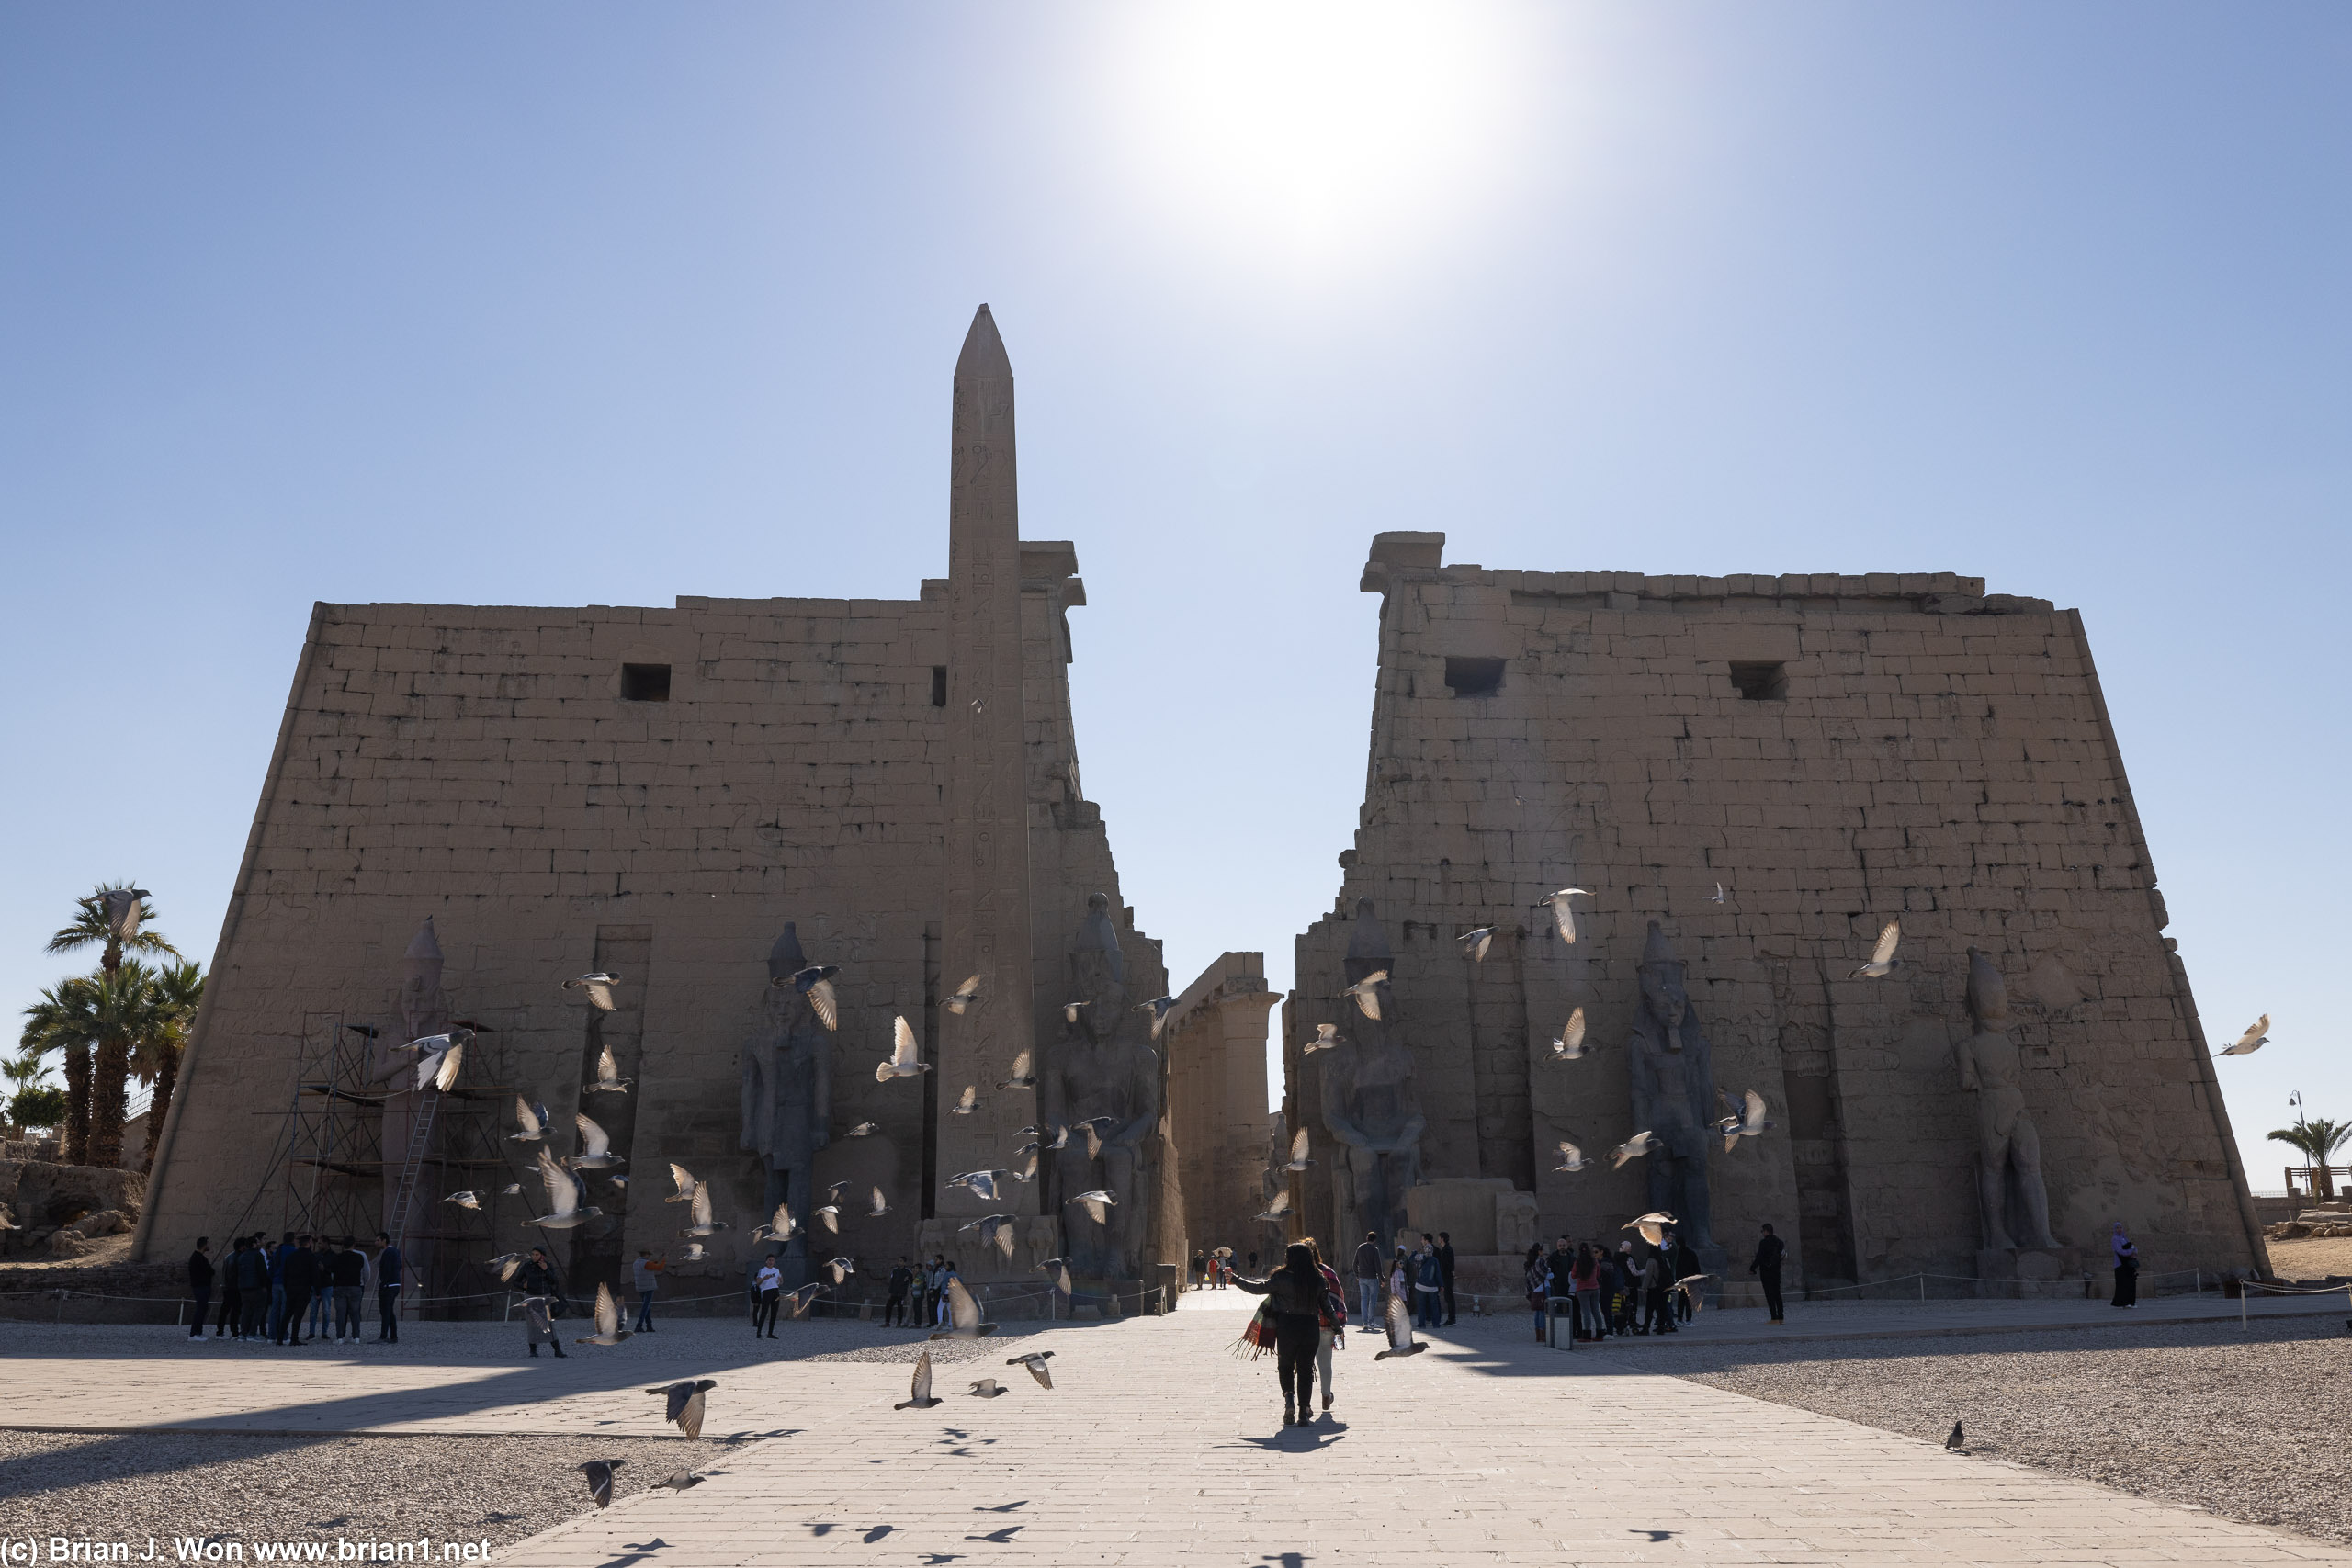 The entrance to Luxor Temple.